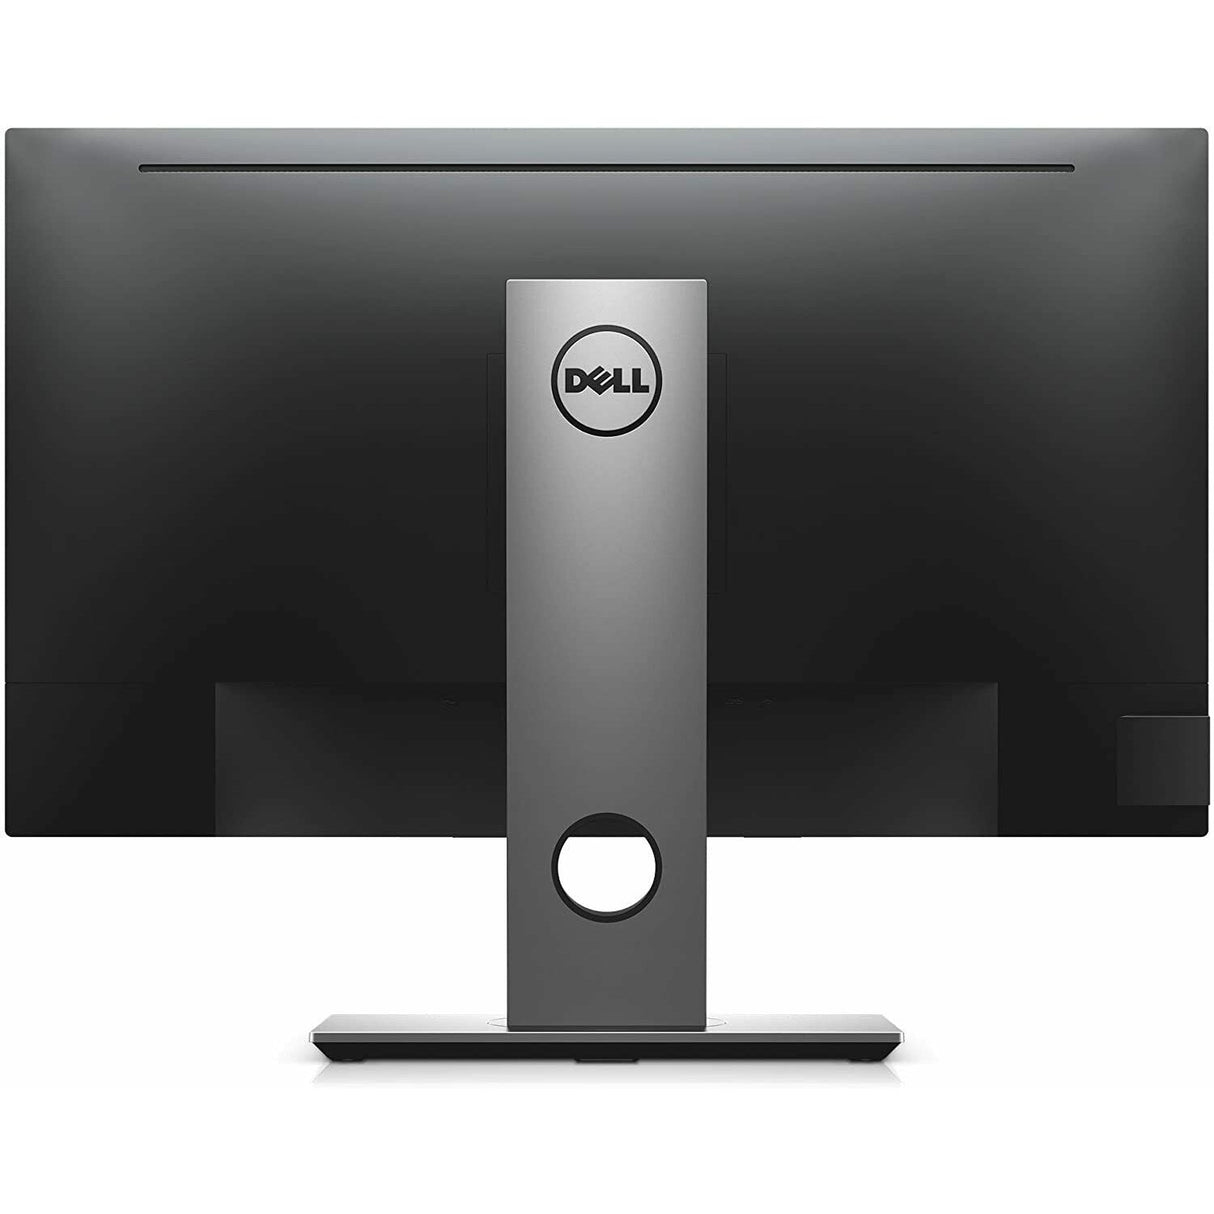 Dell P2417H 24 inch FHD 1080p Monitor - Refurbished Good